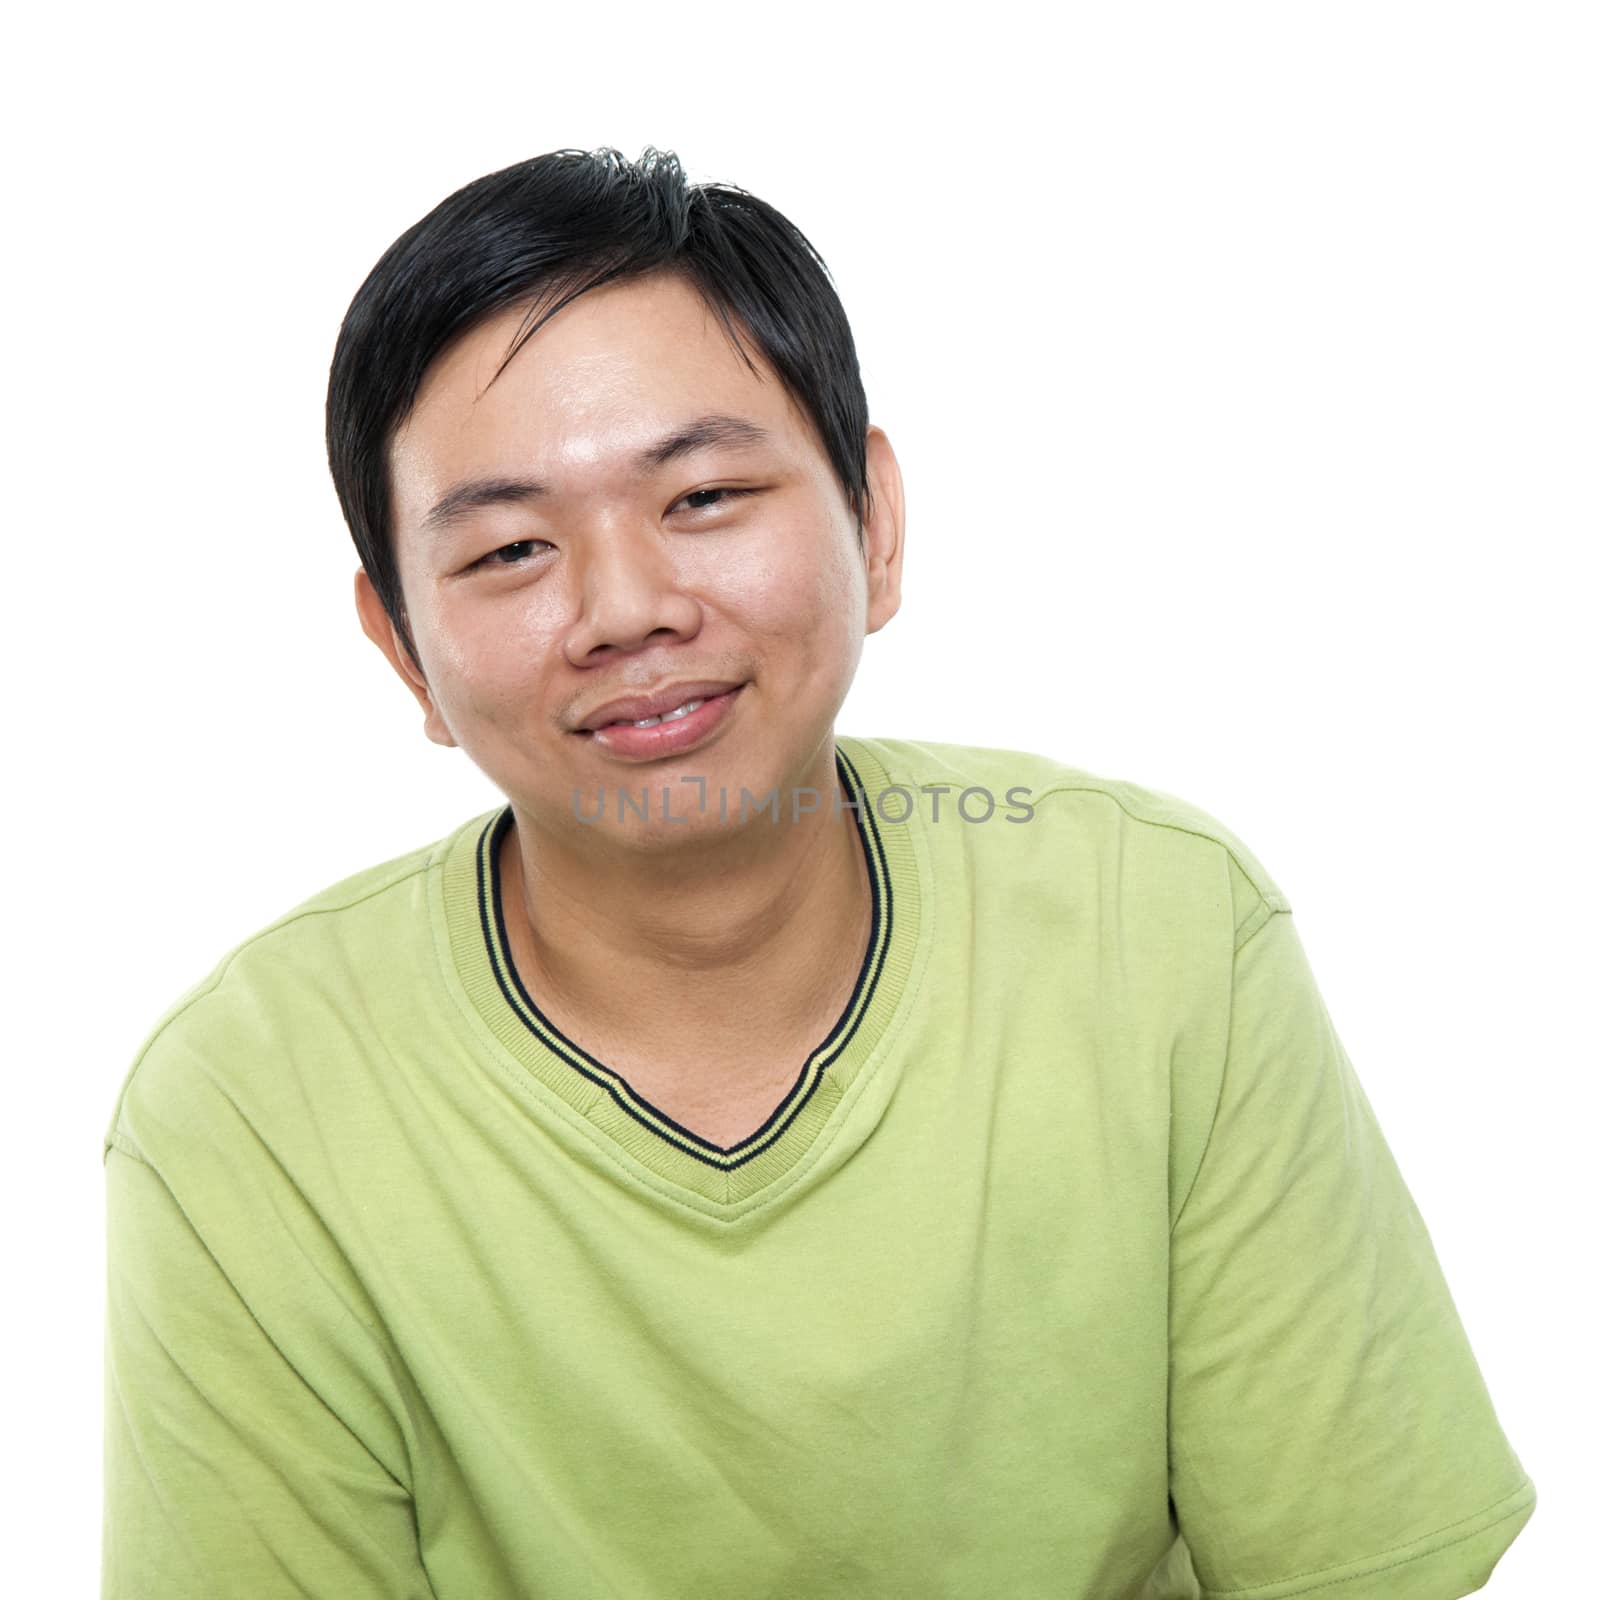 Portrait of 40s Asian middle aged guy smiling, isolated on white background.